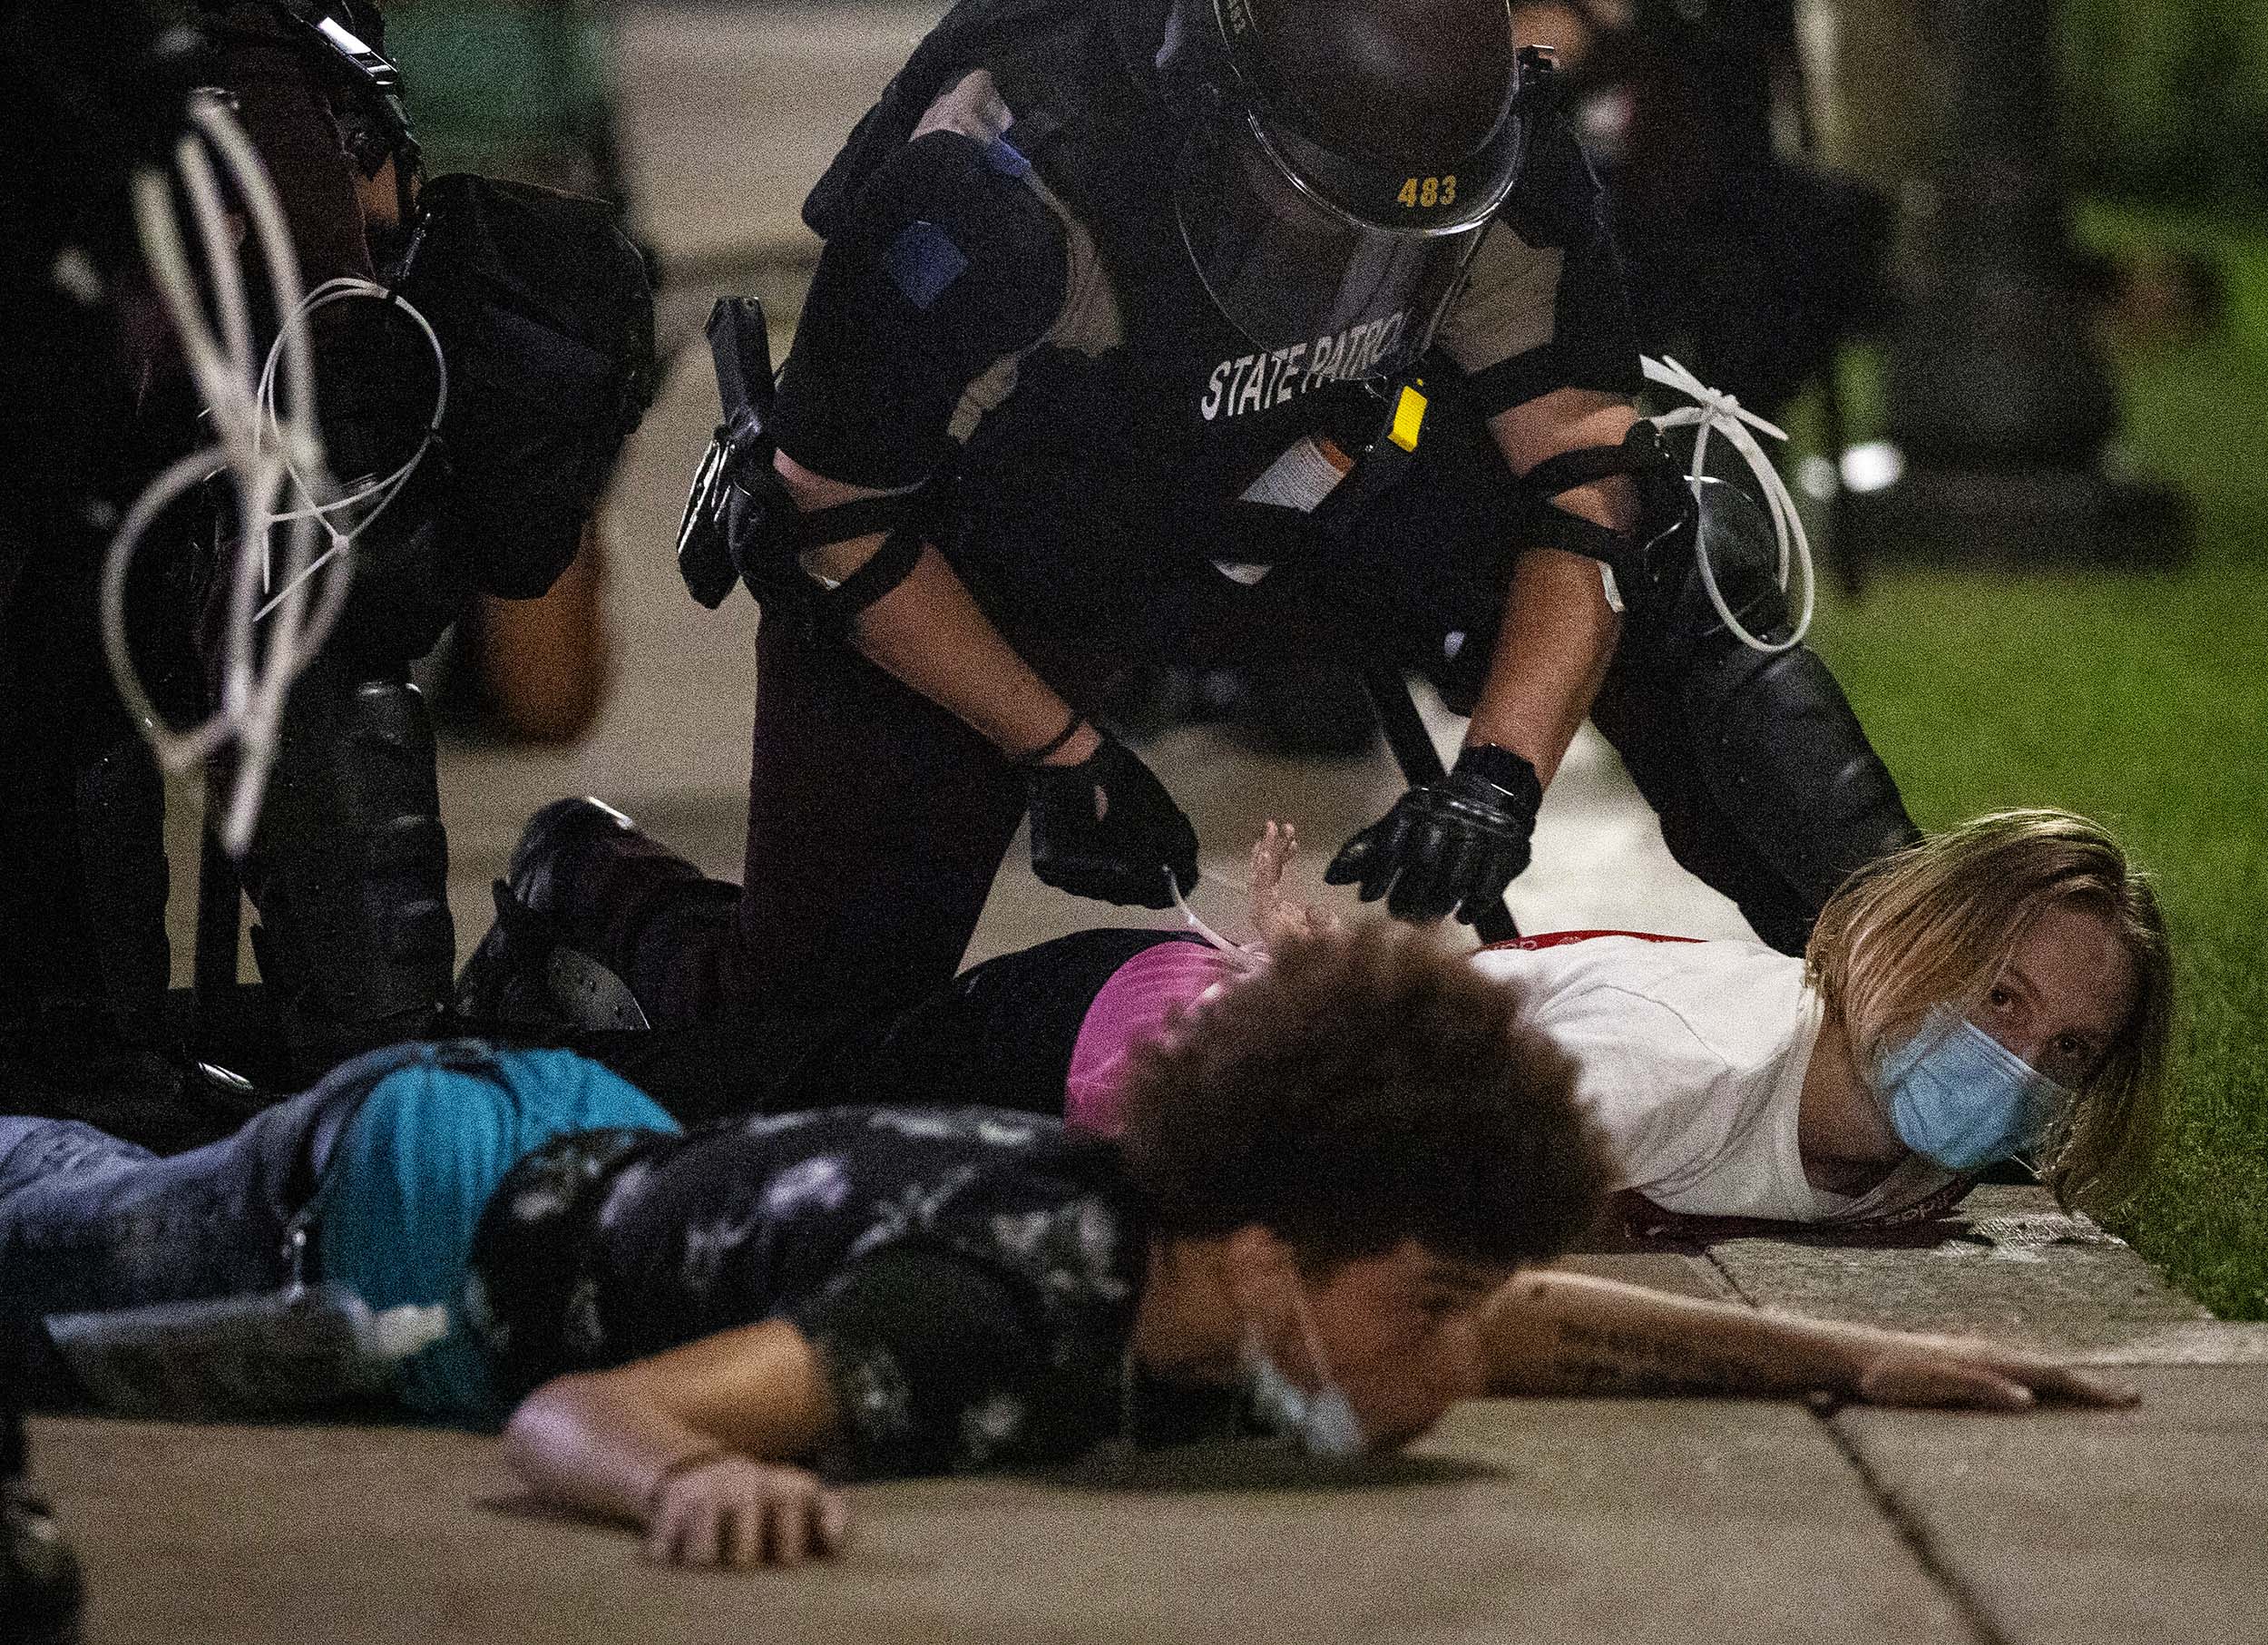 Police arrested 66 protesters in St. Paul, Minnesota, on Monday night.